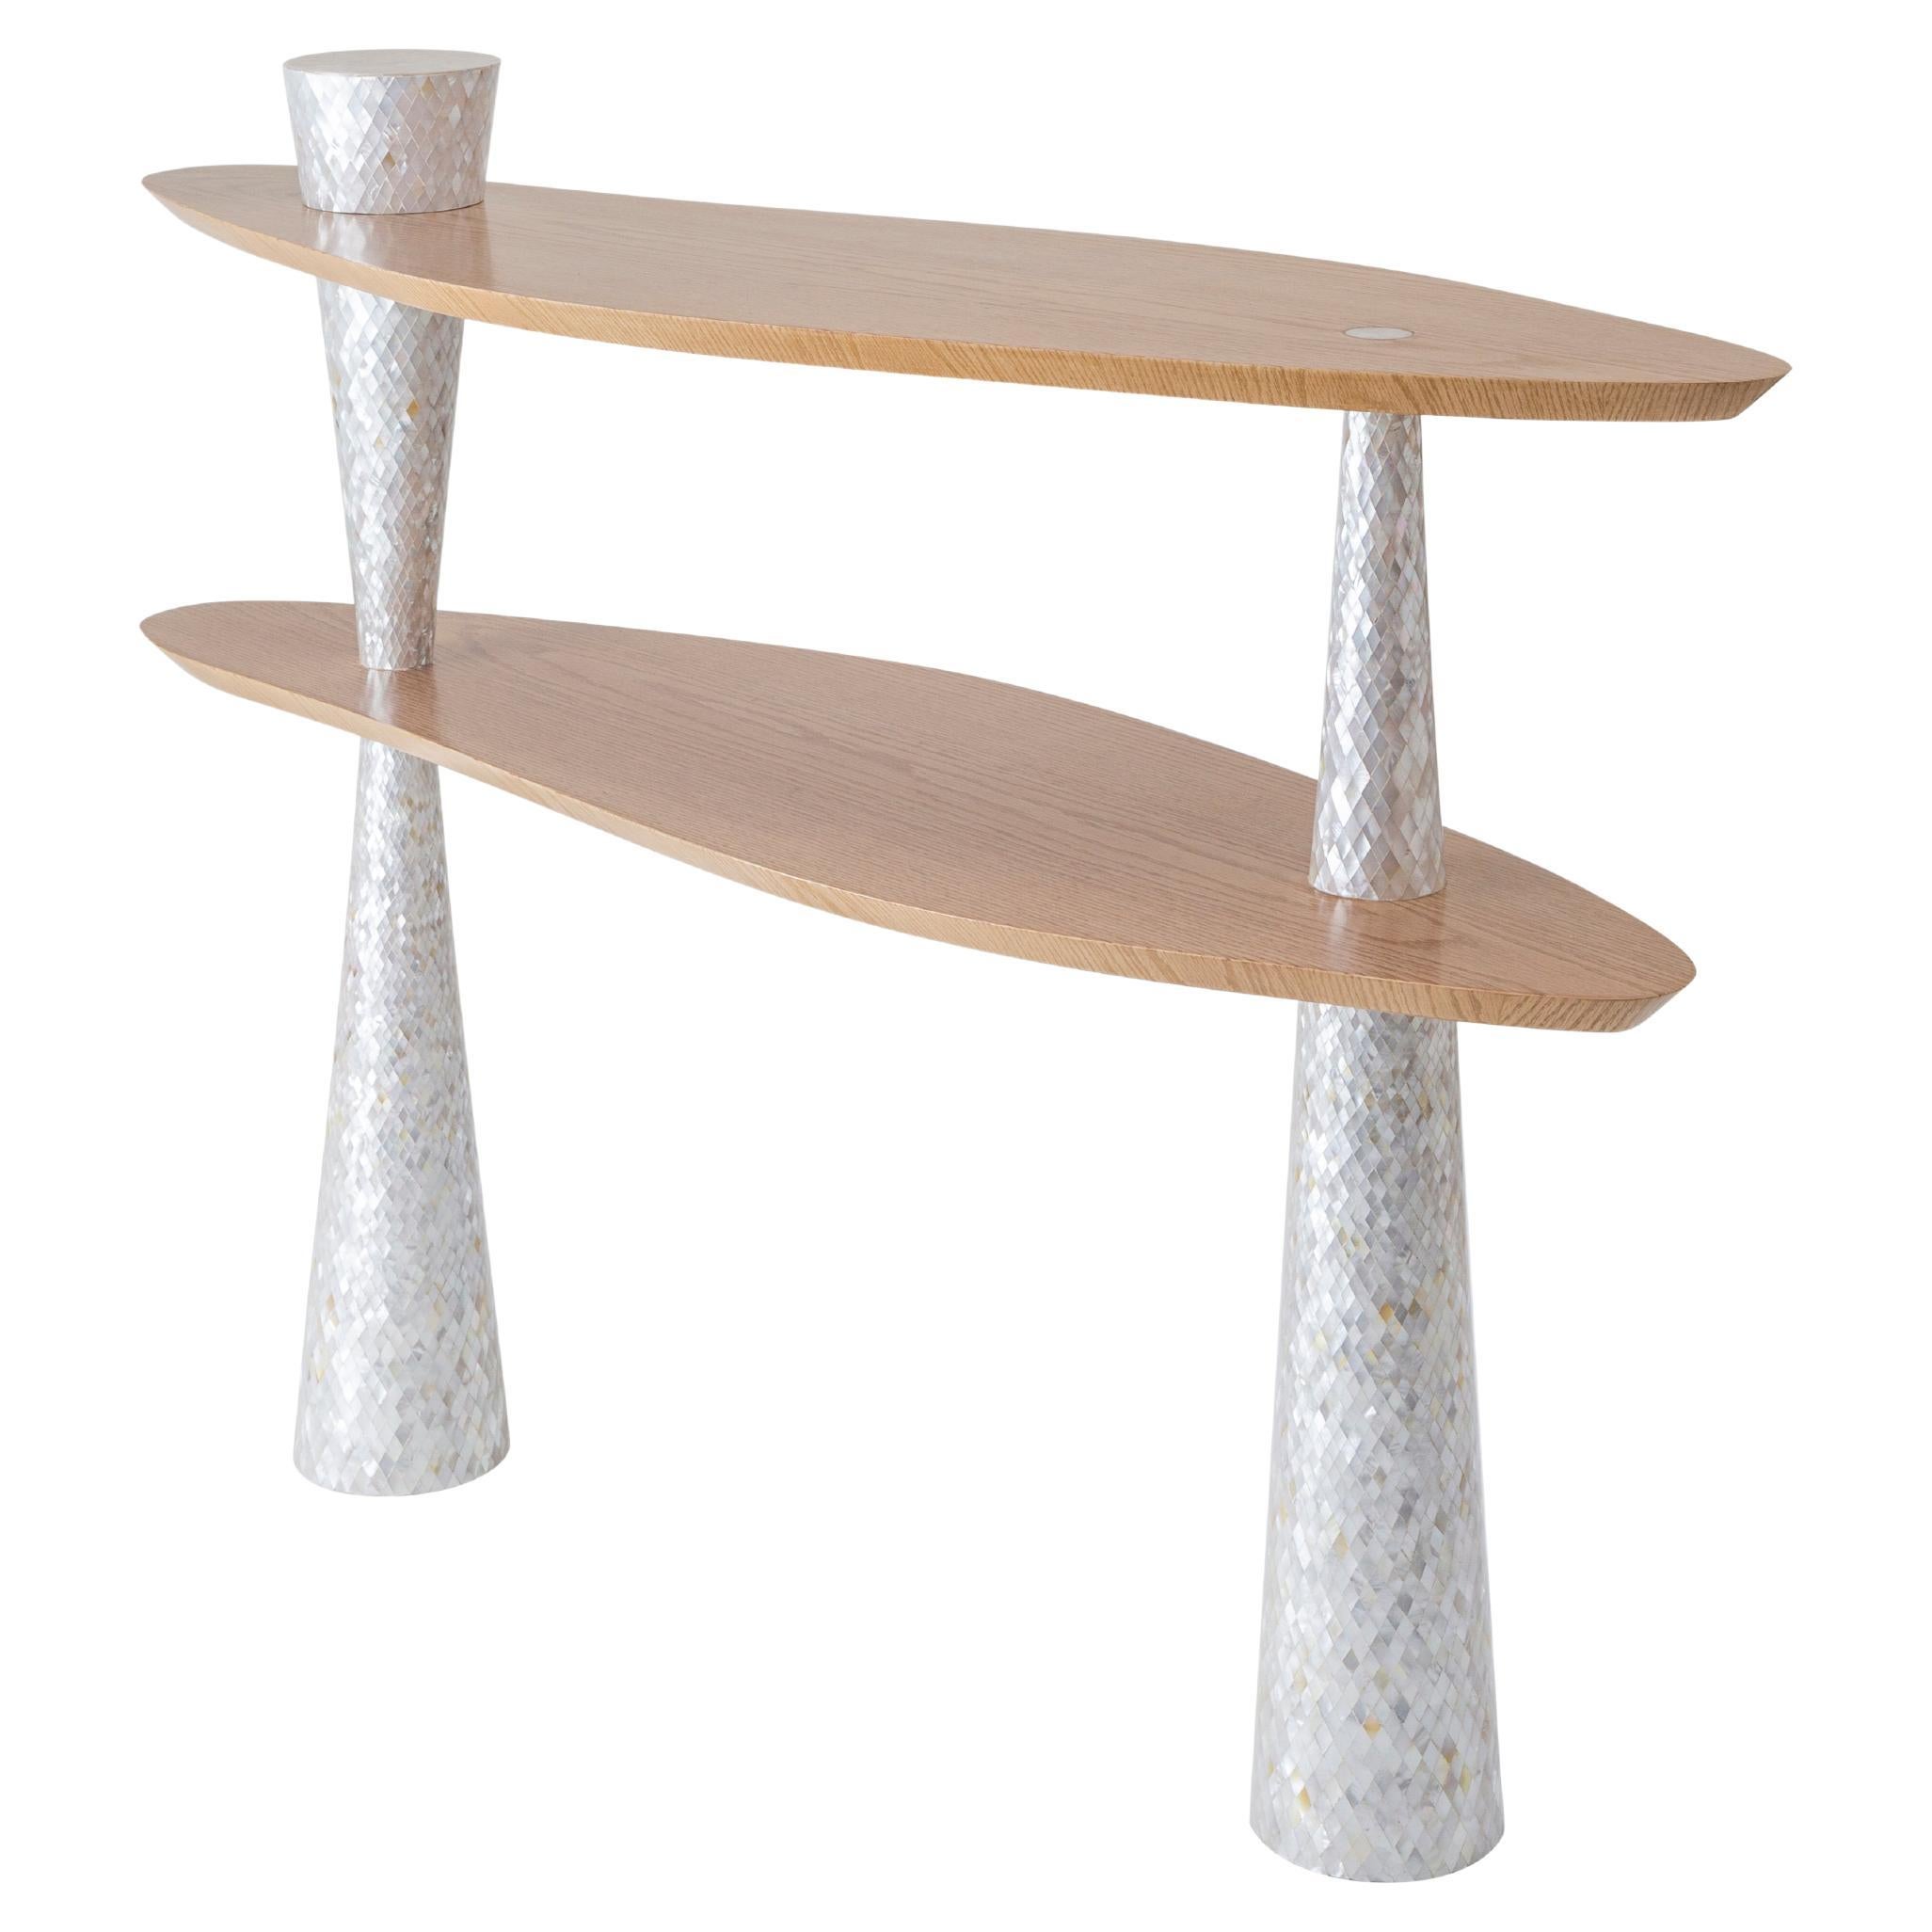 Console with Hand-Laid Mother-of-Pearl Legs & 2 Organic-Shaped Massive Oak Tops